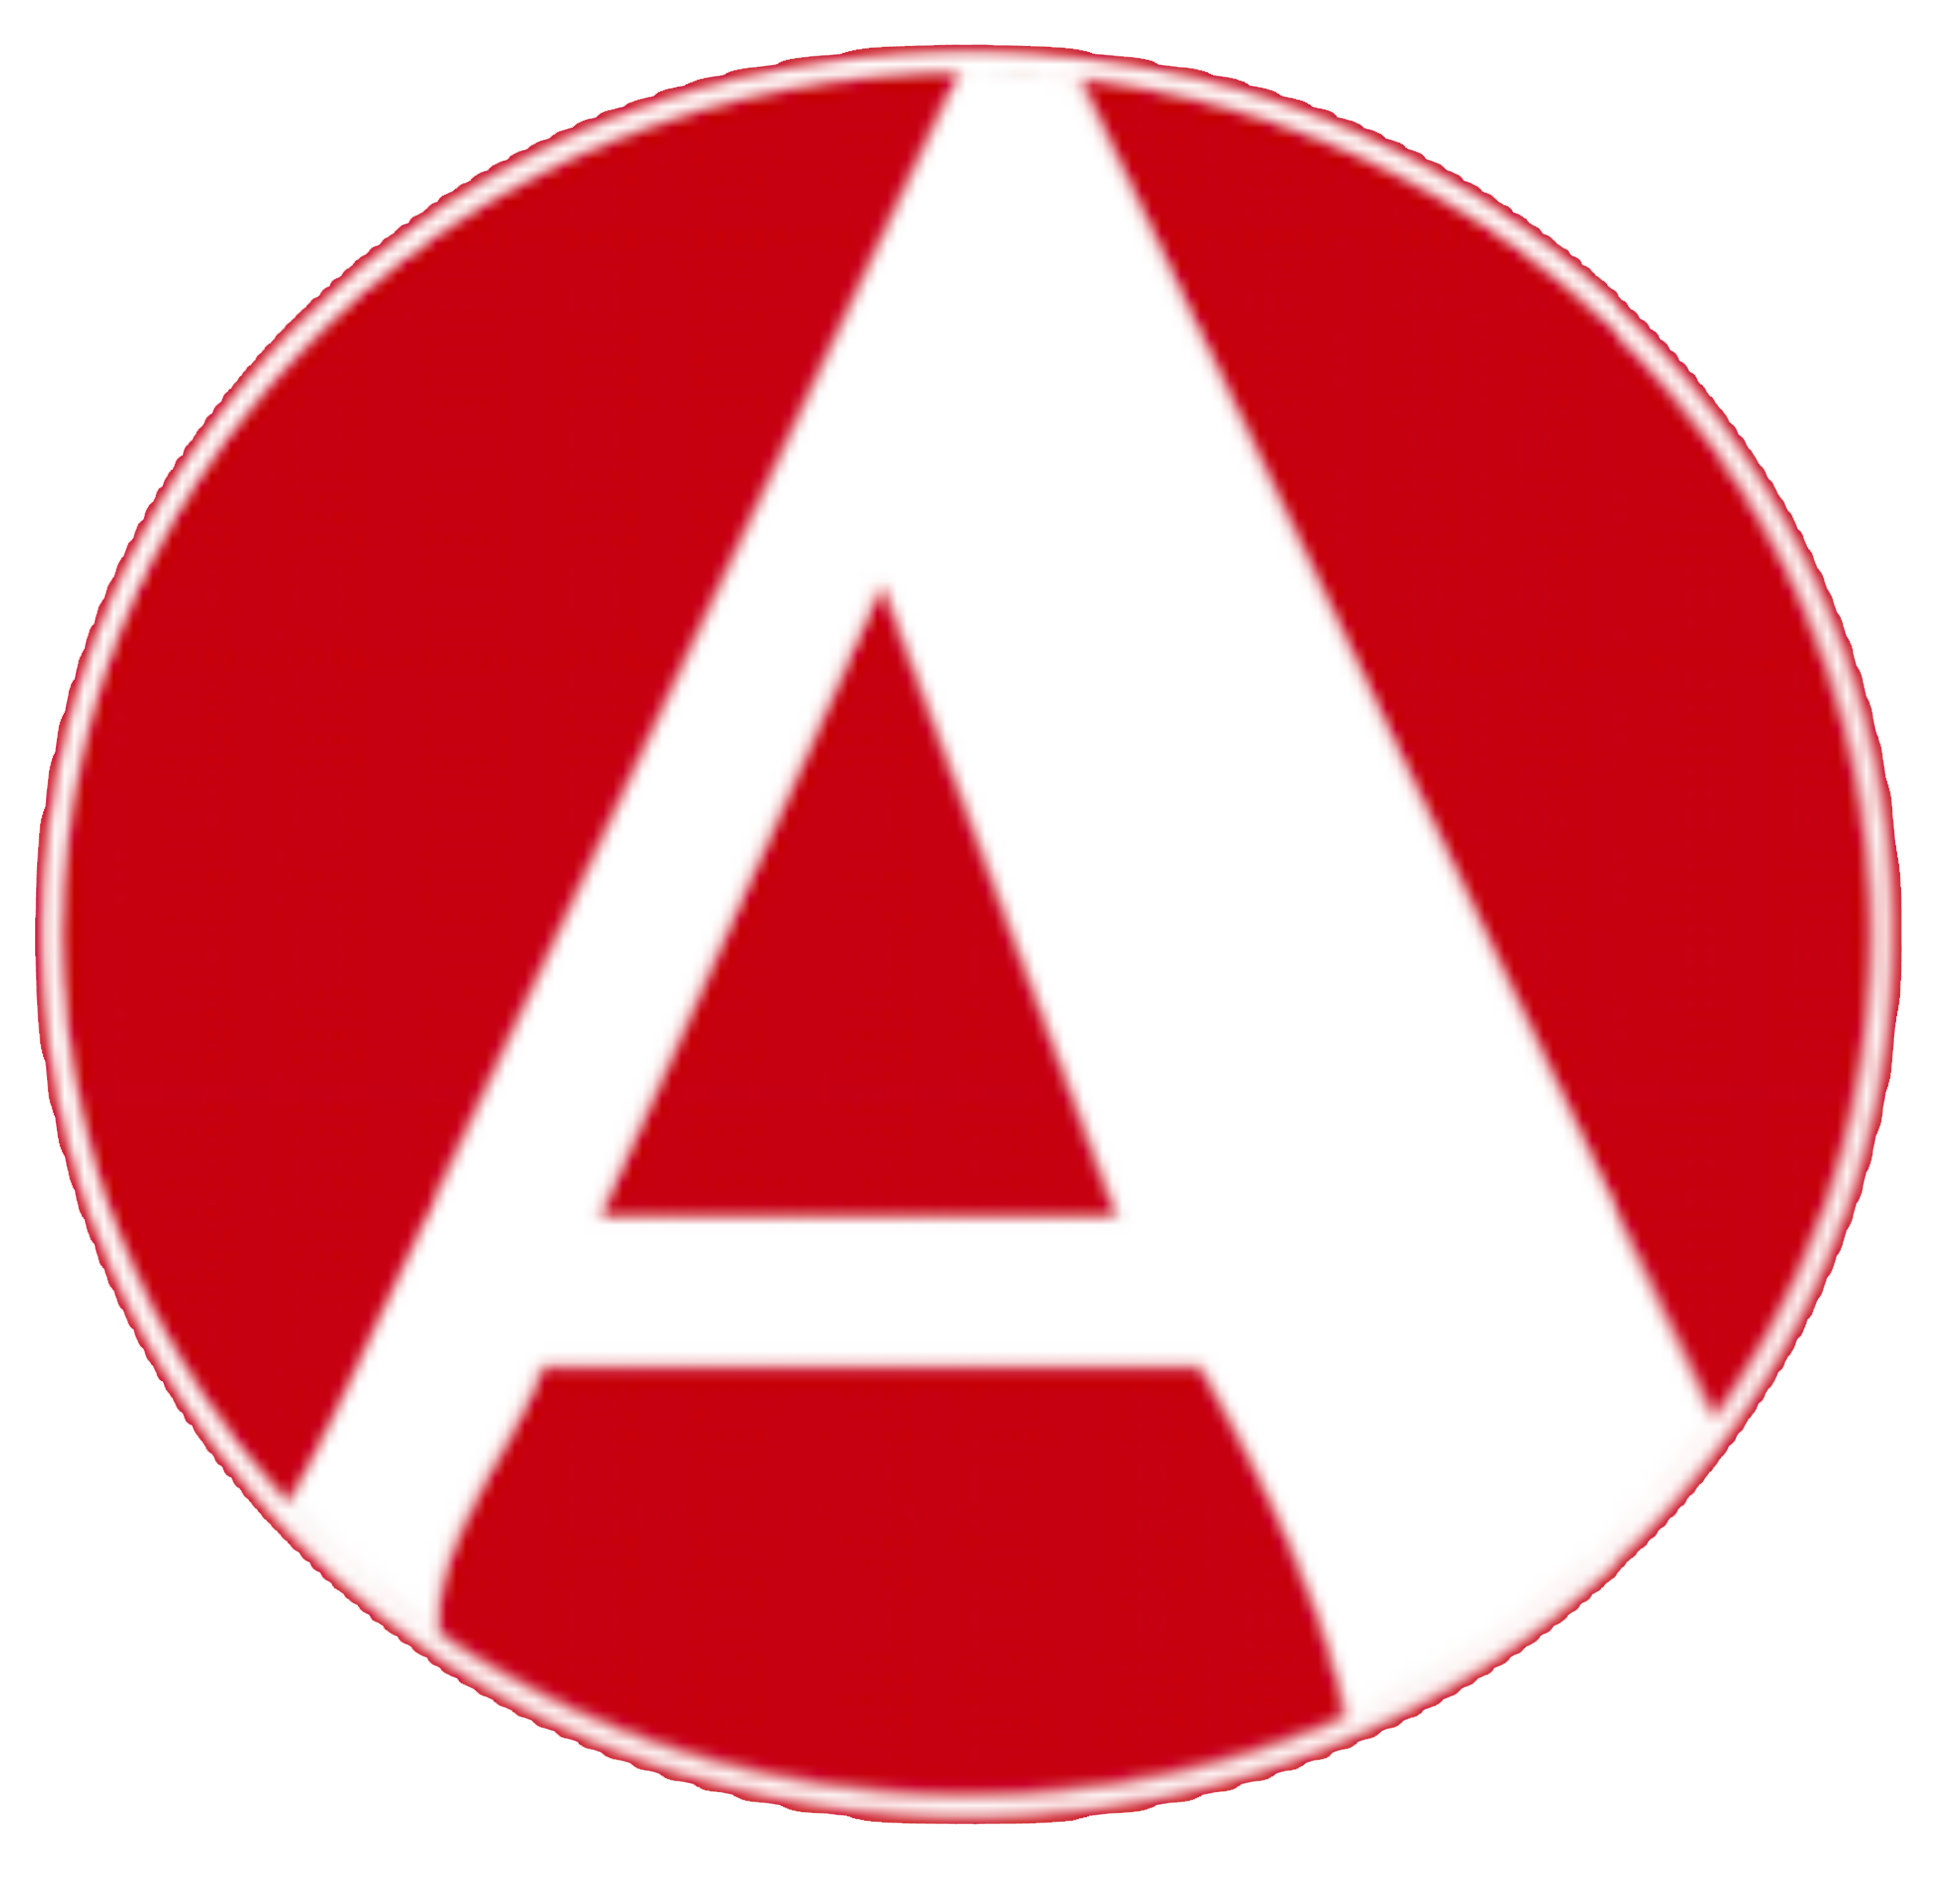 allegro technologies logo icon (Big). Circular in shape with a maroone read and a big letter A